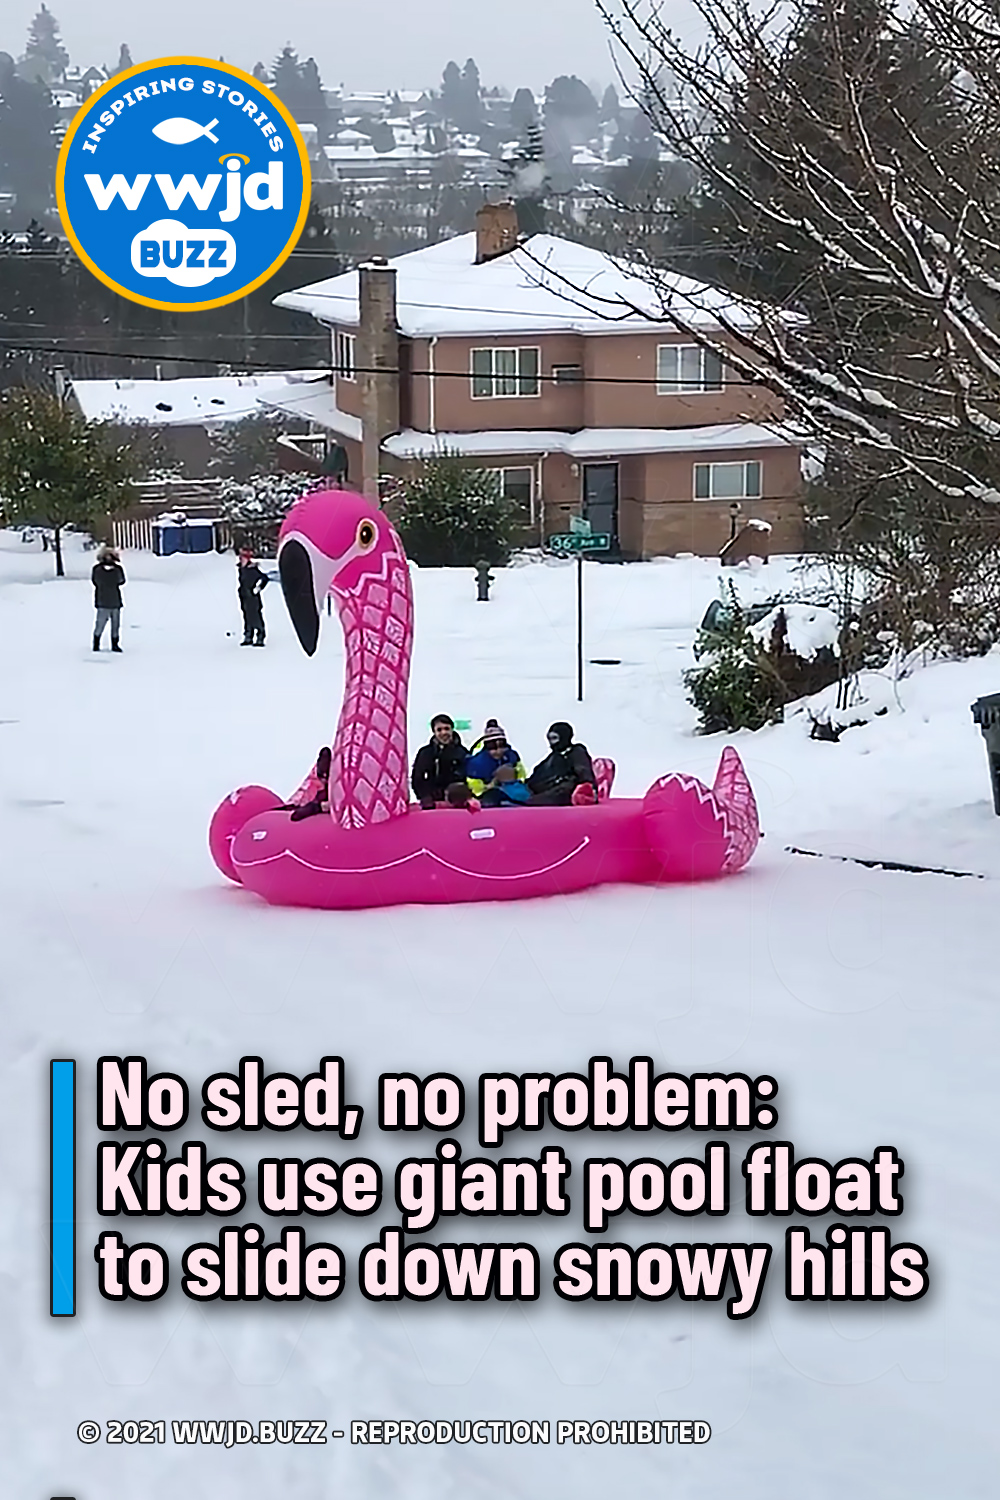 No sled, no problem: Kids use giant pool float to slide down snowy hills